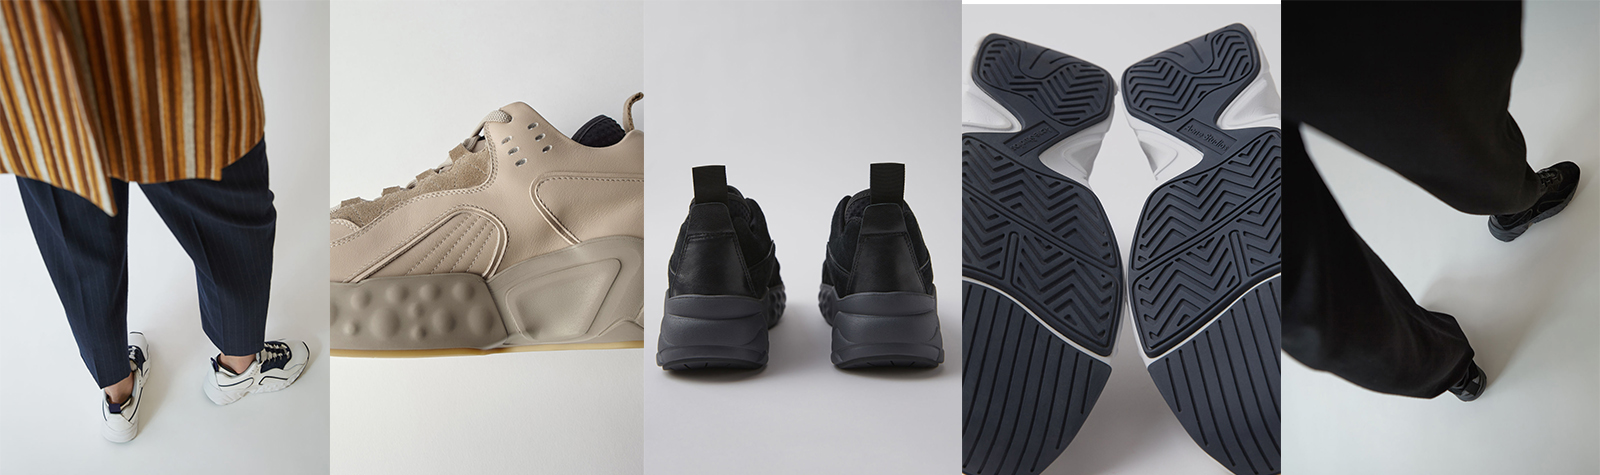 Acne Studios Have Jumped On The ‘Dad Sneaker’ Bandwagon – And We Love It